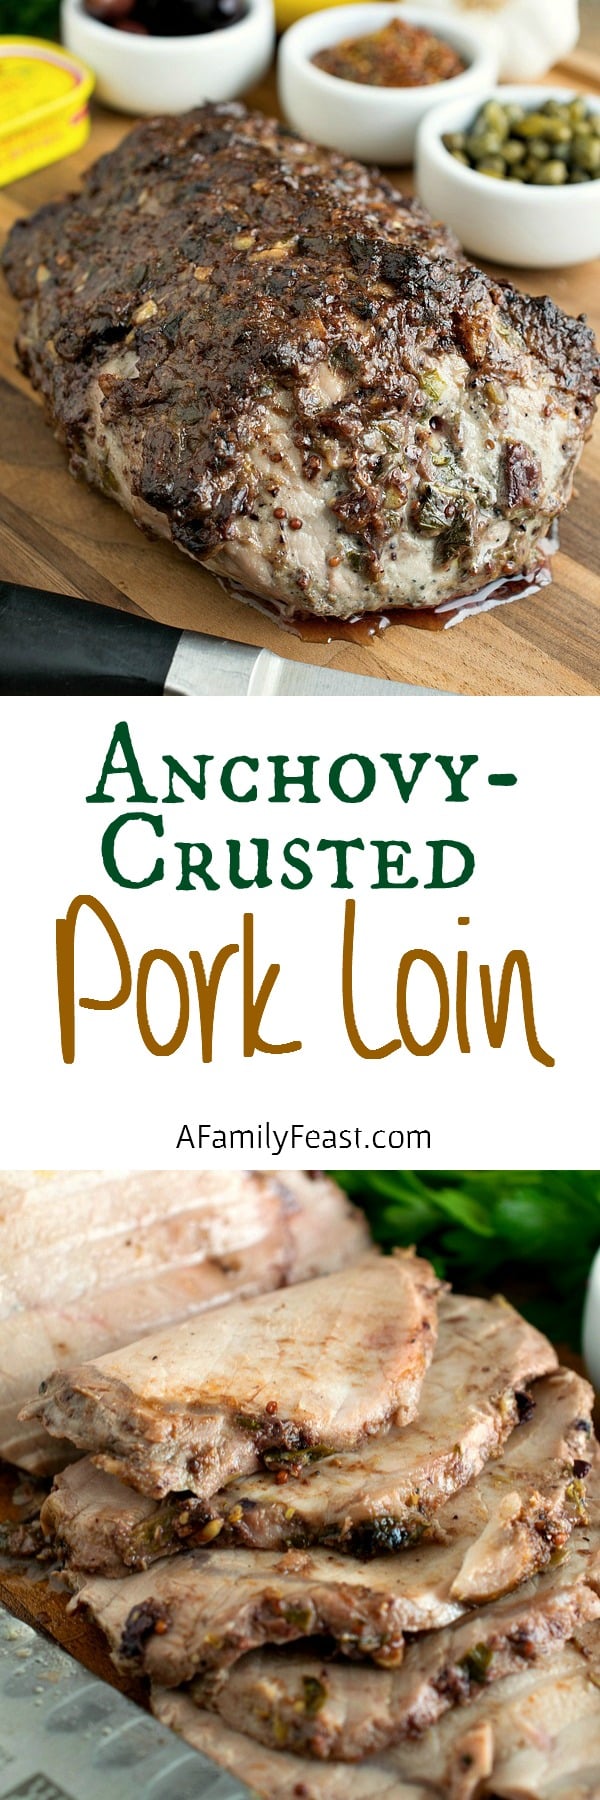 Anchovy-Crusted Pork Loin - A simple, savory rub transforms a pork loin into something truly memorable!